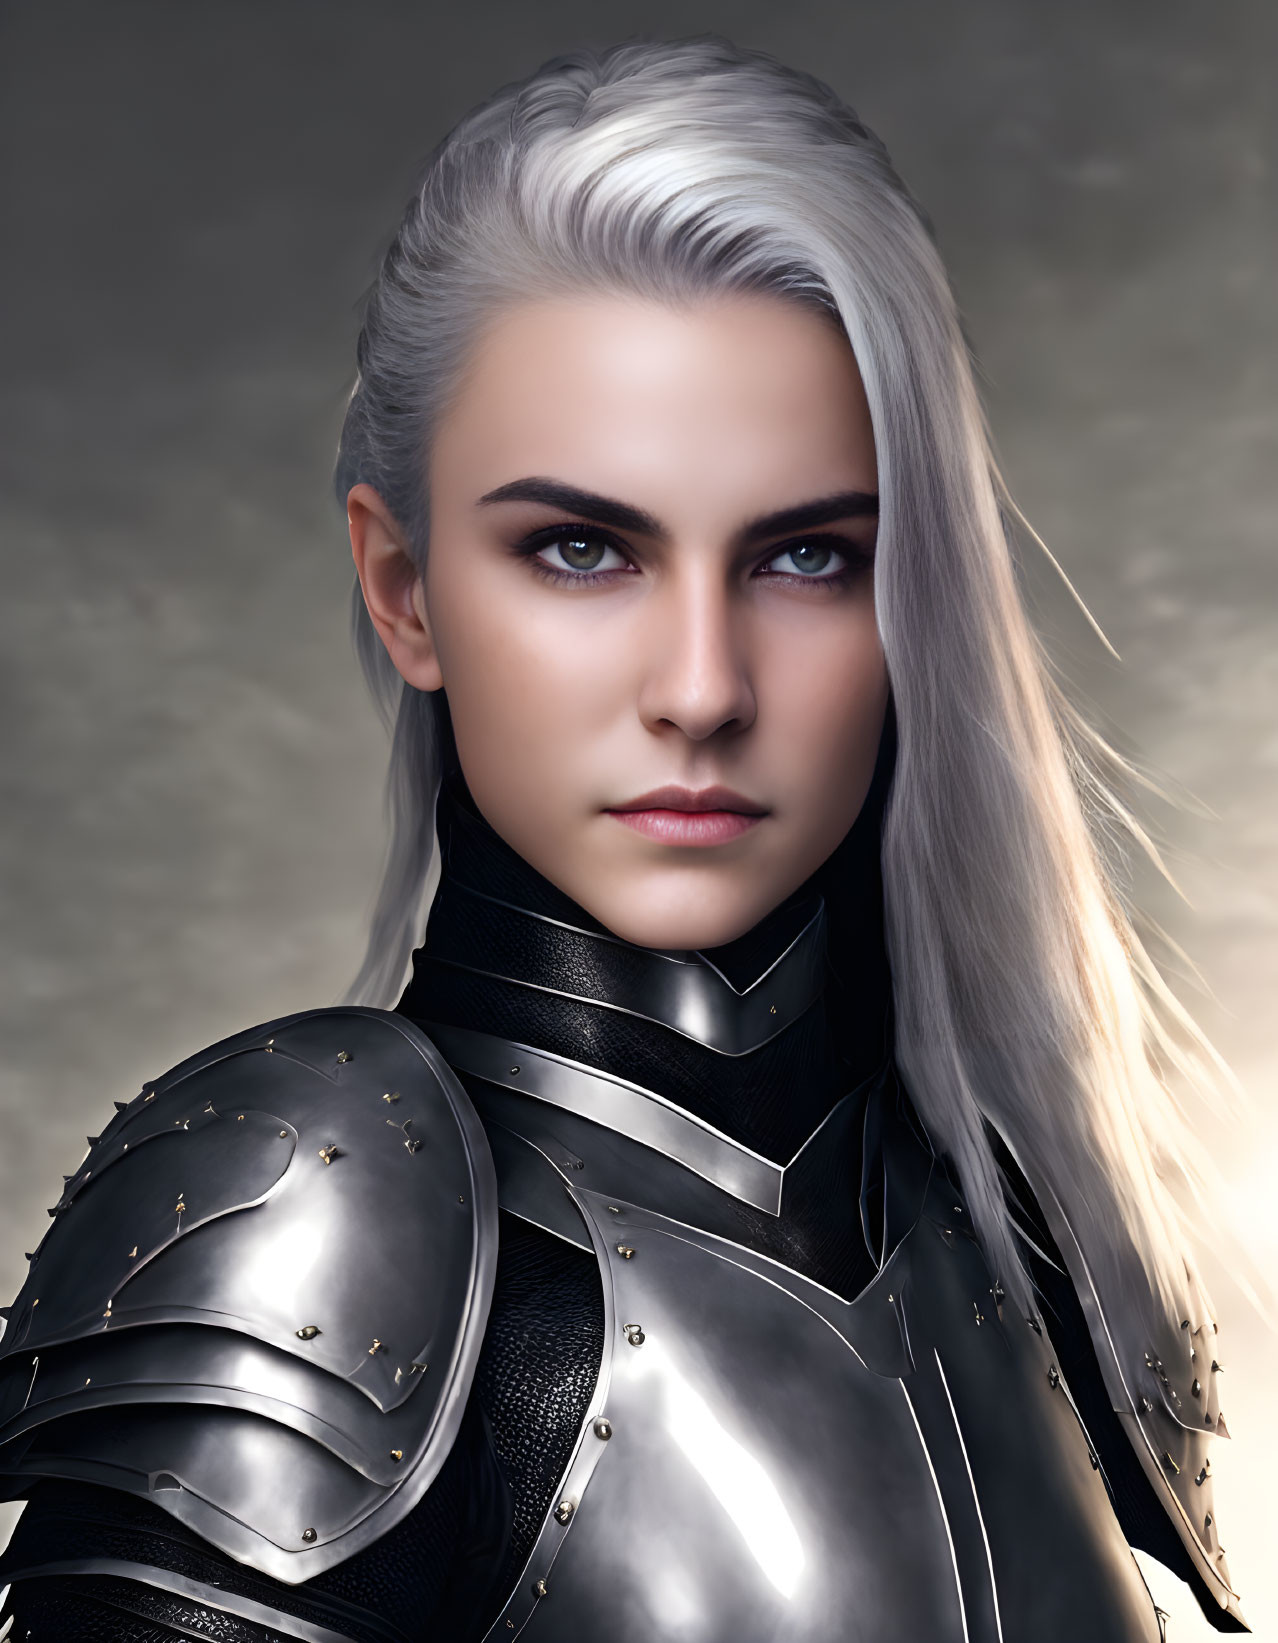 Digital art portrait: Woman with white hair and blue eyes in medieval plate armor